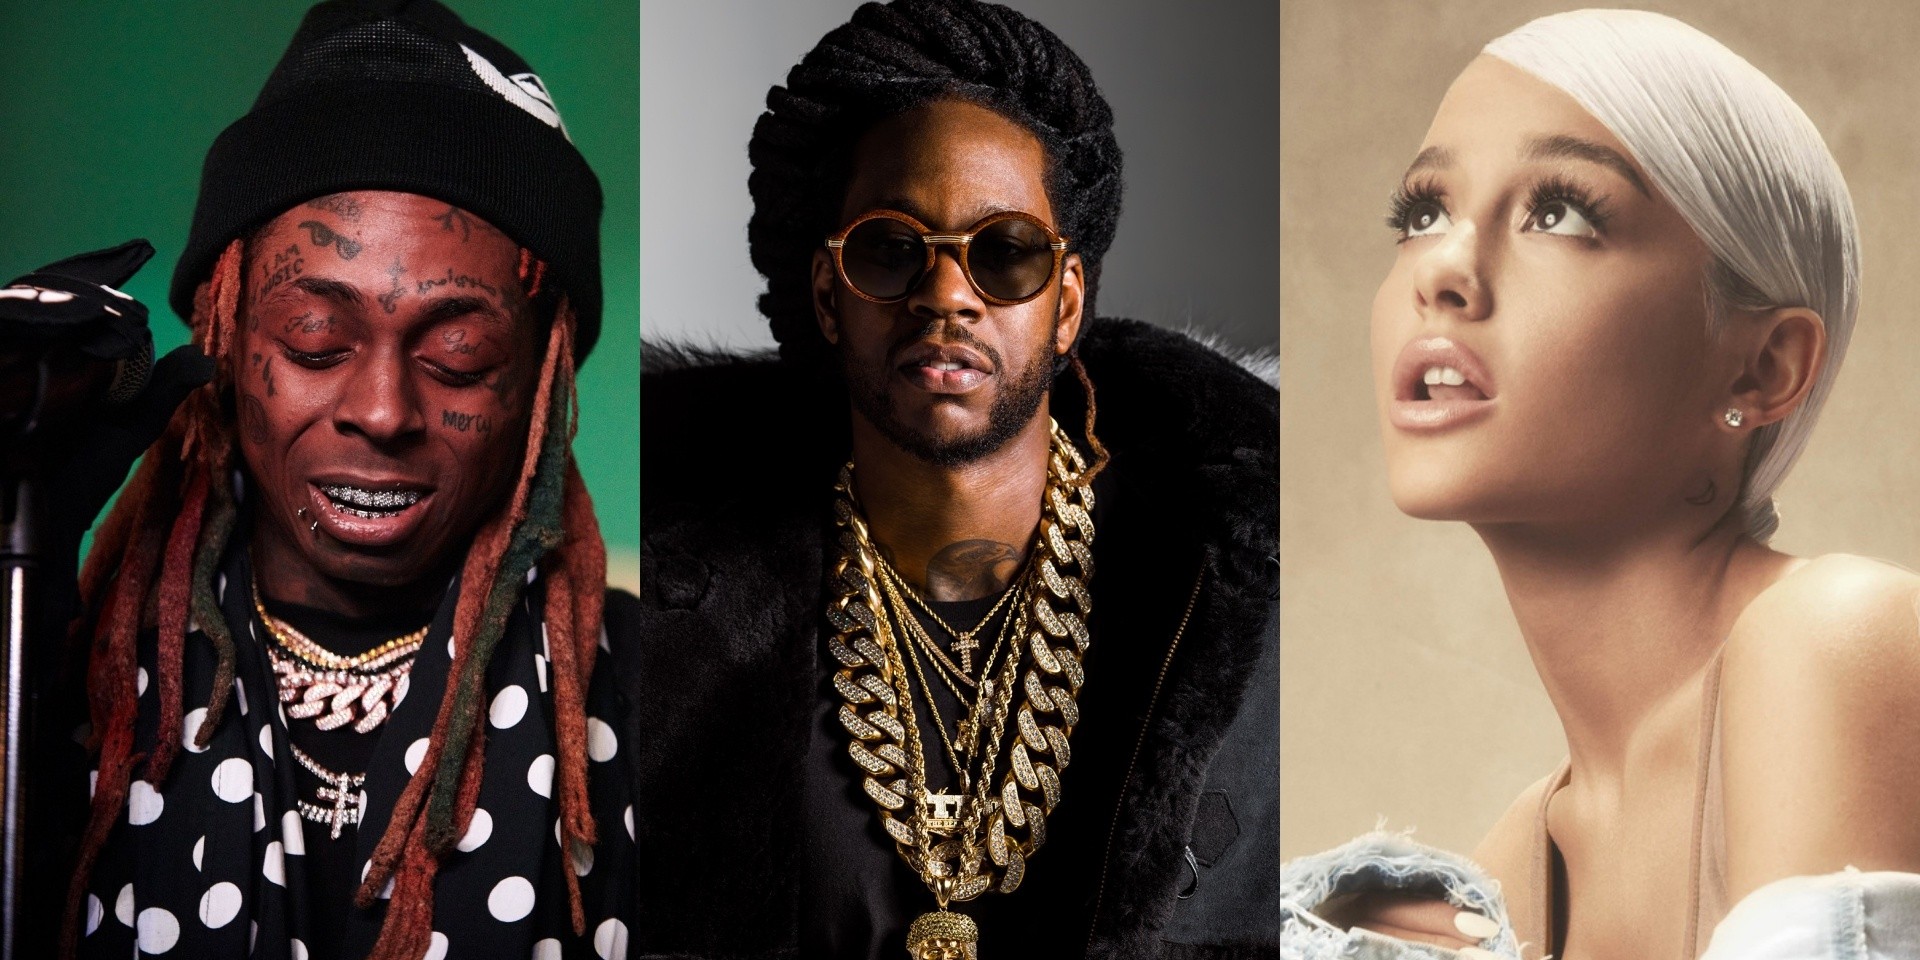 2 Chainz shares tracklist for new album, guests include Kendrick Lamar, Ariana Grande, Lil Wayne and more